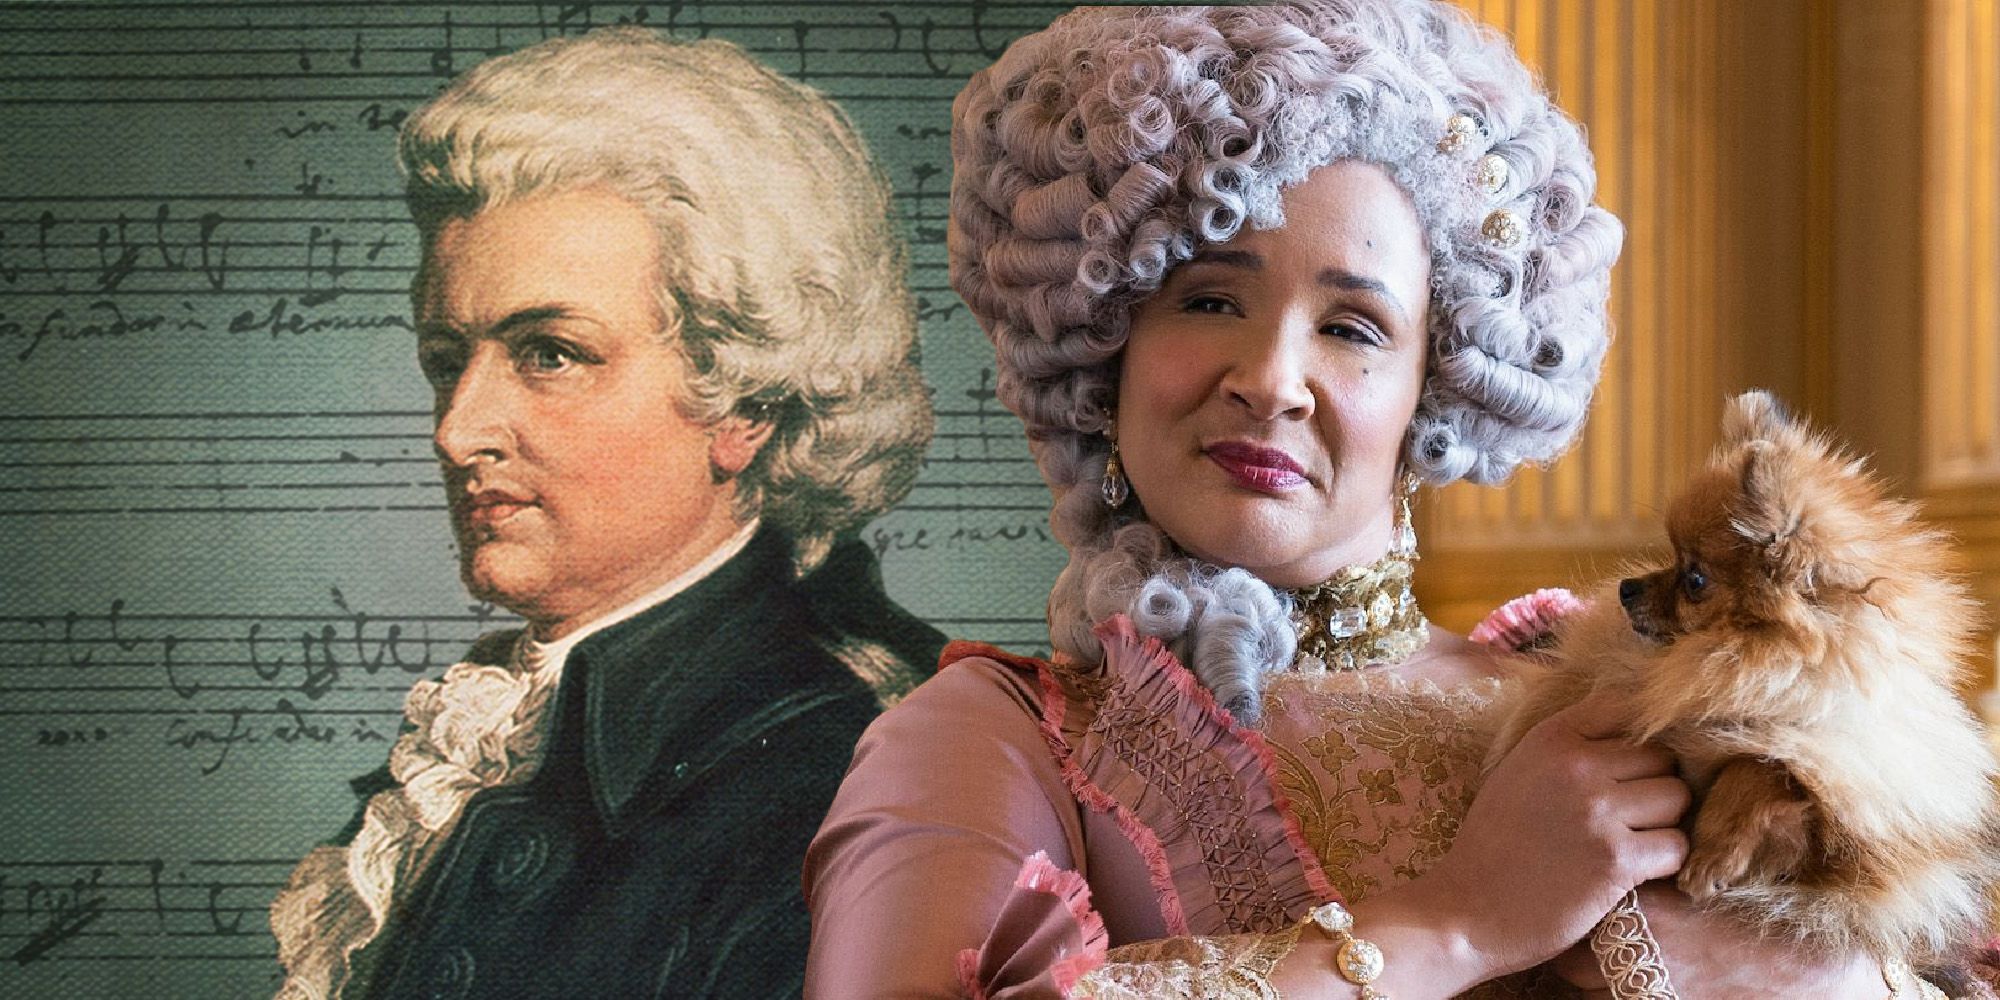 Watch This Lady Play An Entire Mozart Symphony With Her